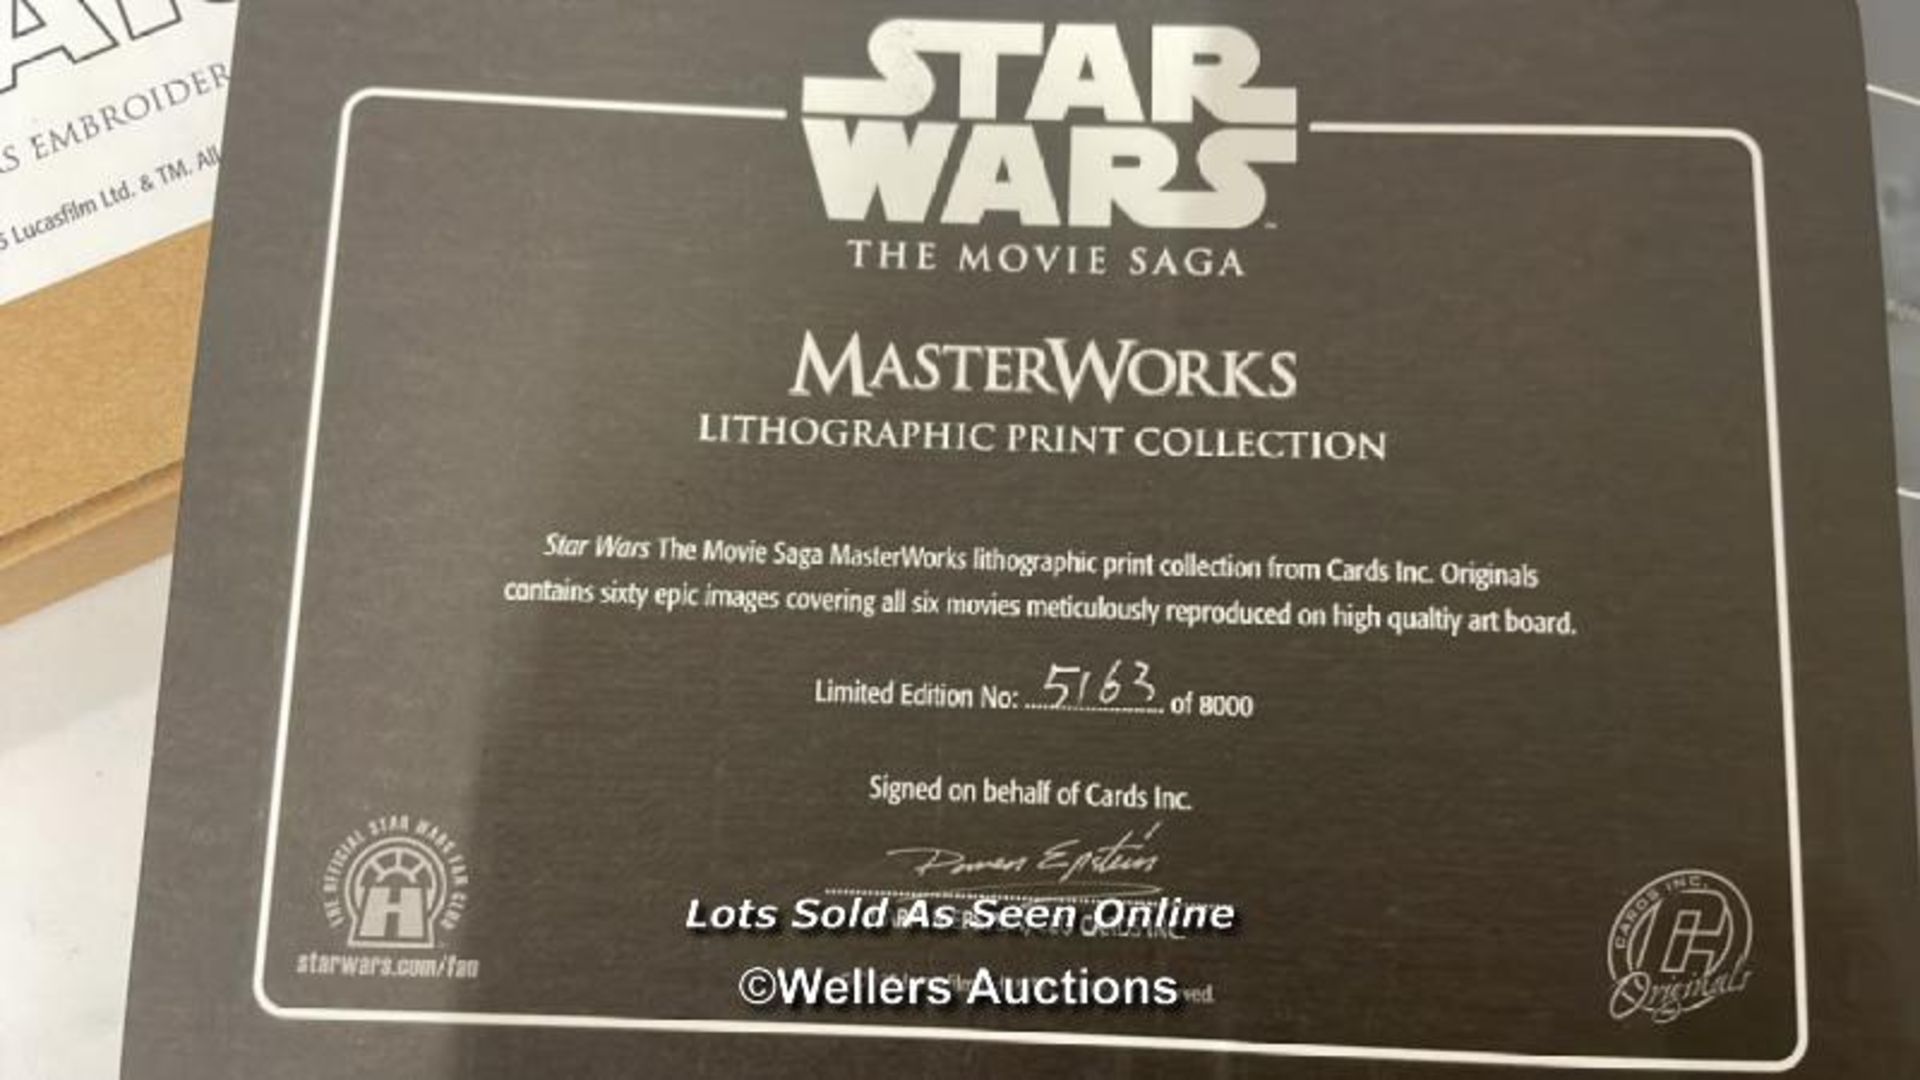 Star Wars saga lithographic print collection by Masterworks 2005 Limited edition 5163 / 8000, - Image 3 of 7